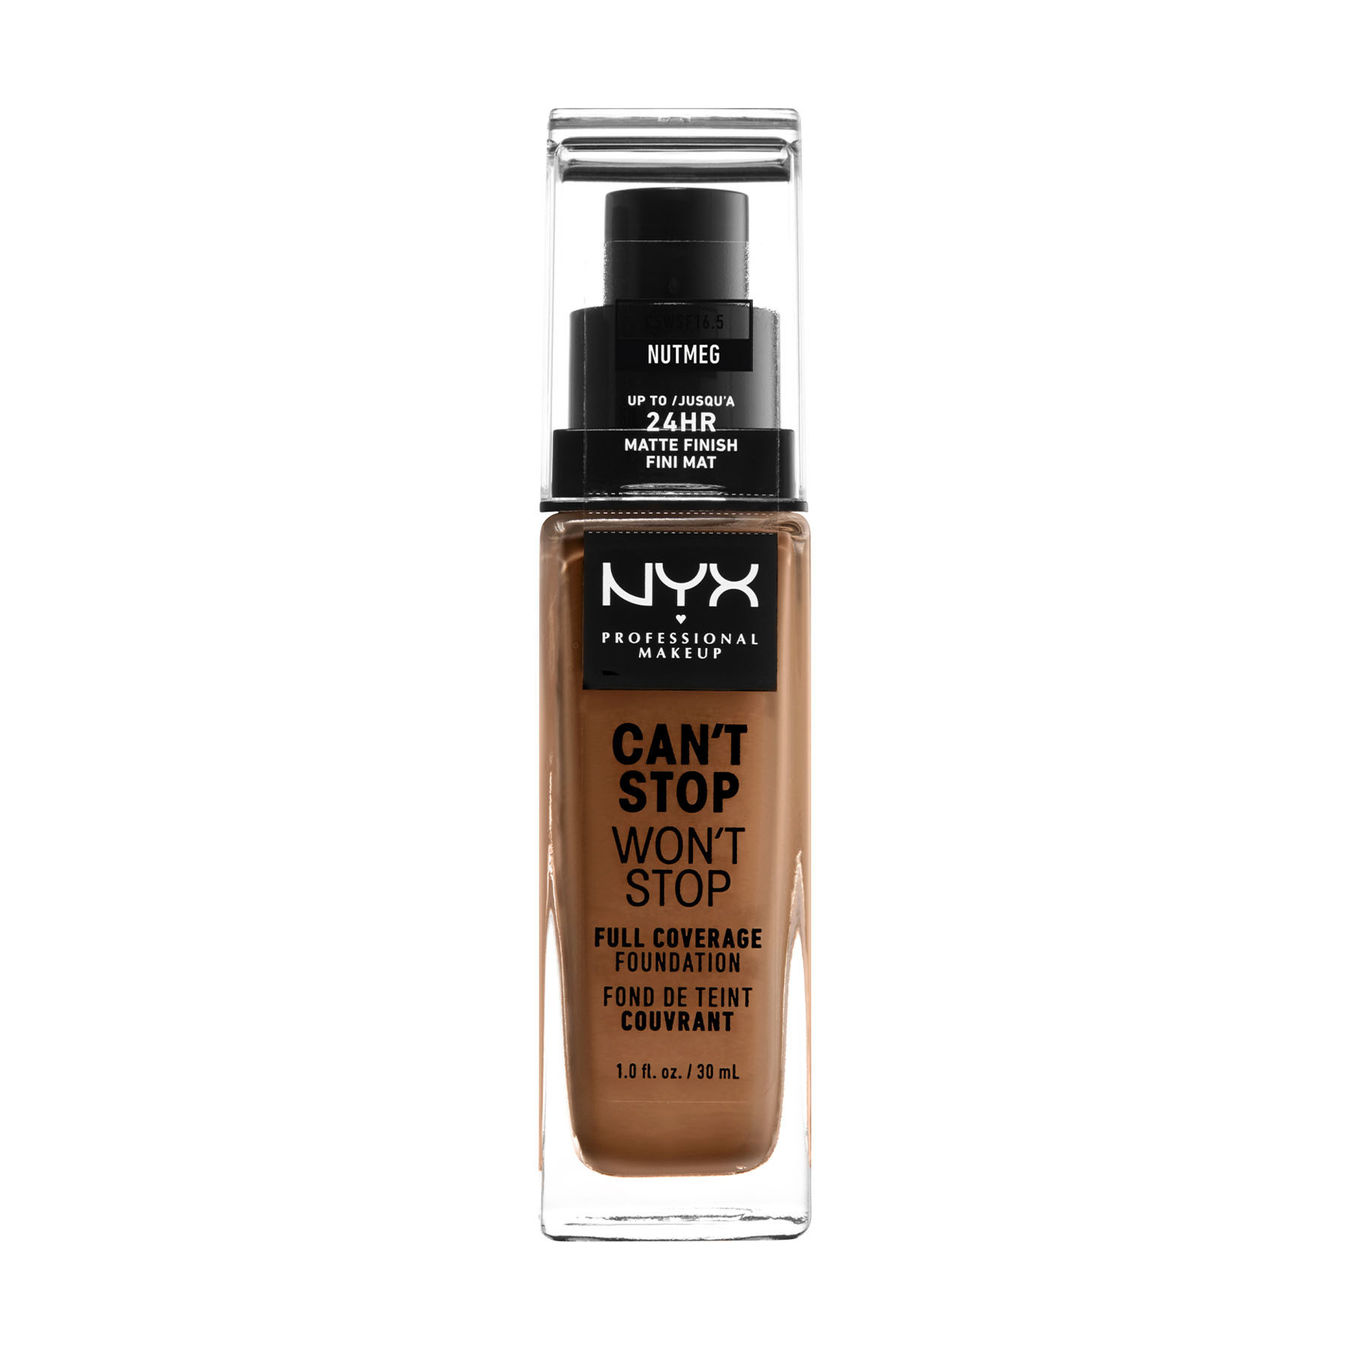 NYX Professional Makeup Can't Stop Won't Stop Make-up/Foundation 1ST von NYX Professional Makeup